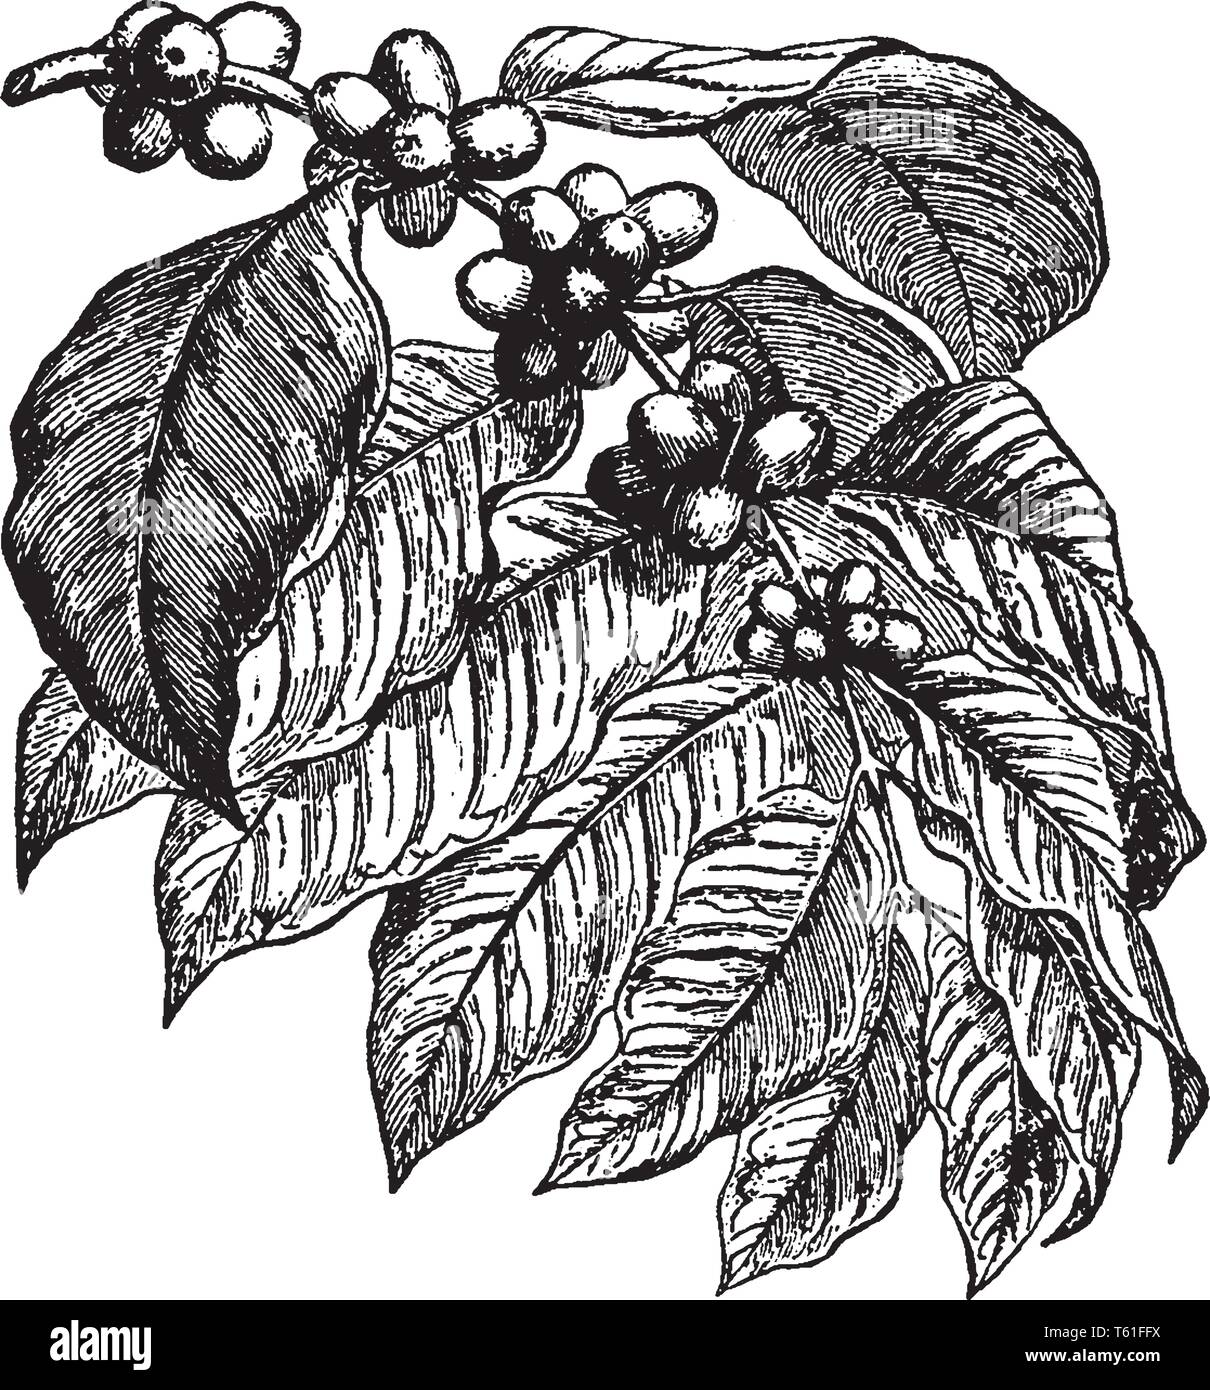 A picture showing a coffee plant. This is from Rubiaceae family. The fruit is round and red. Leaves are broad and simple, vintage line drawing or engr Stock Vector